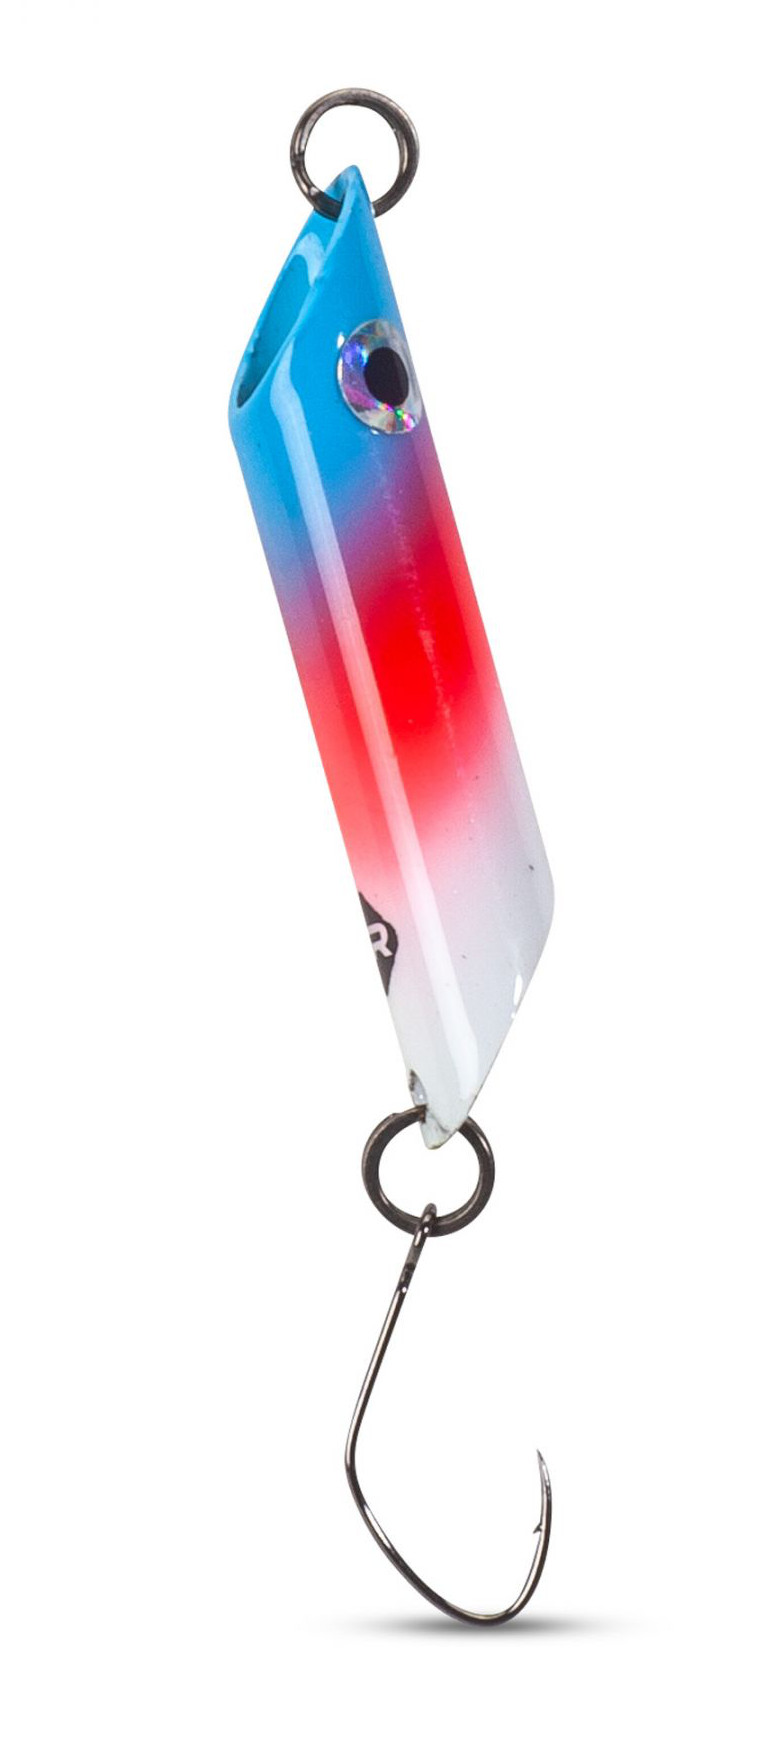 Iron Trout Pico Piper Forel Lure (3g) - Red/Blue